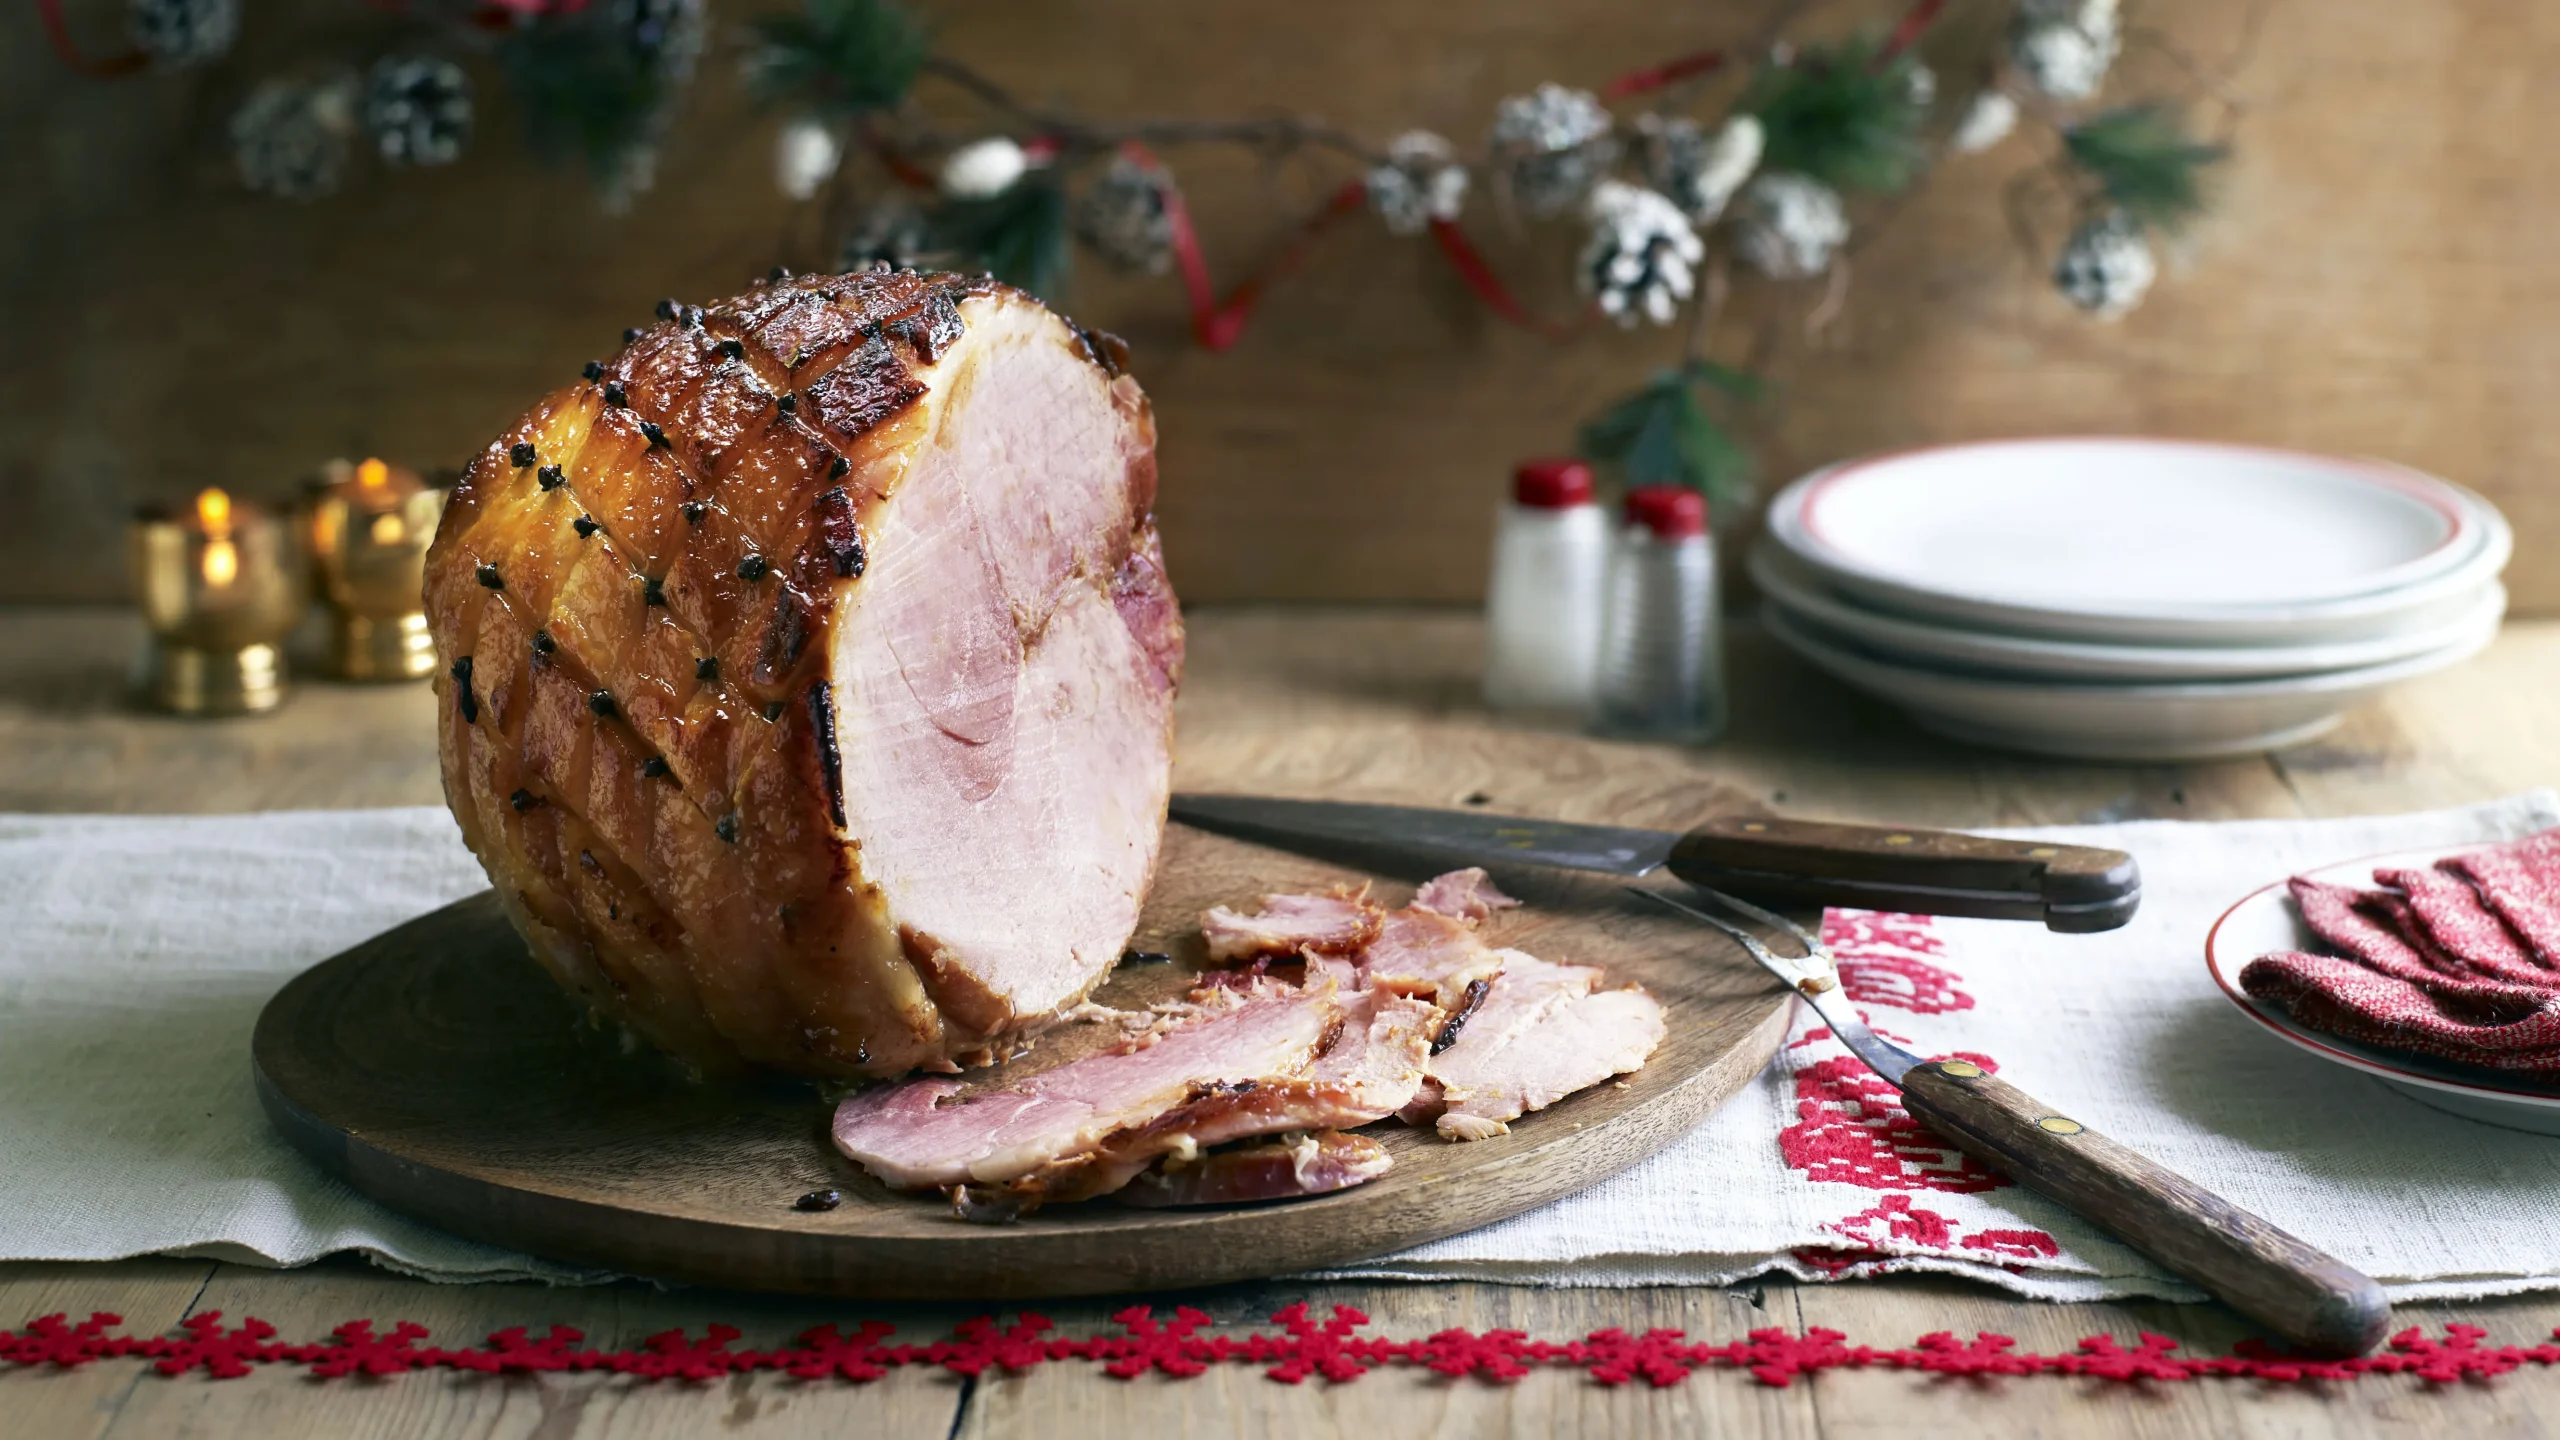 smoked gammon glaze recipe - What is in the glaze packet that comes with ham